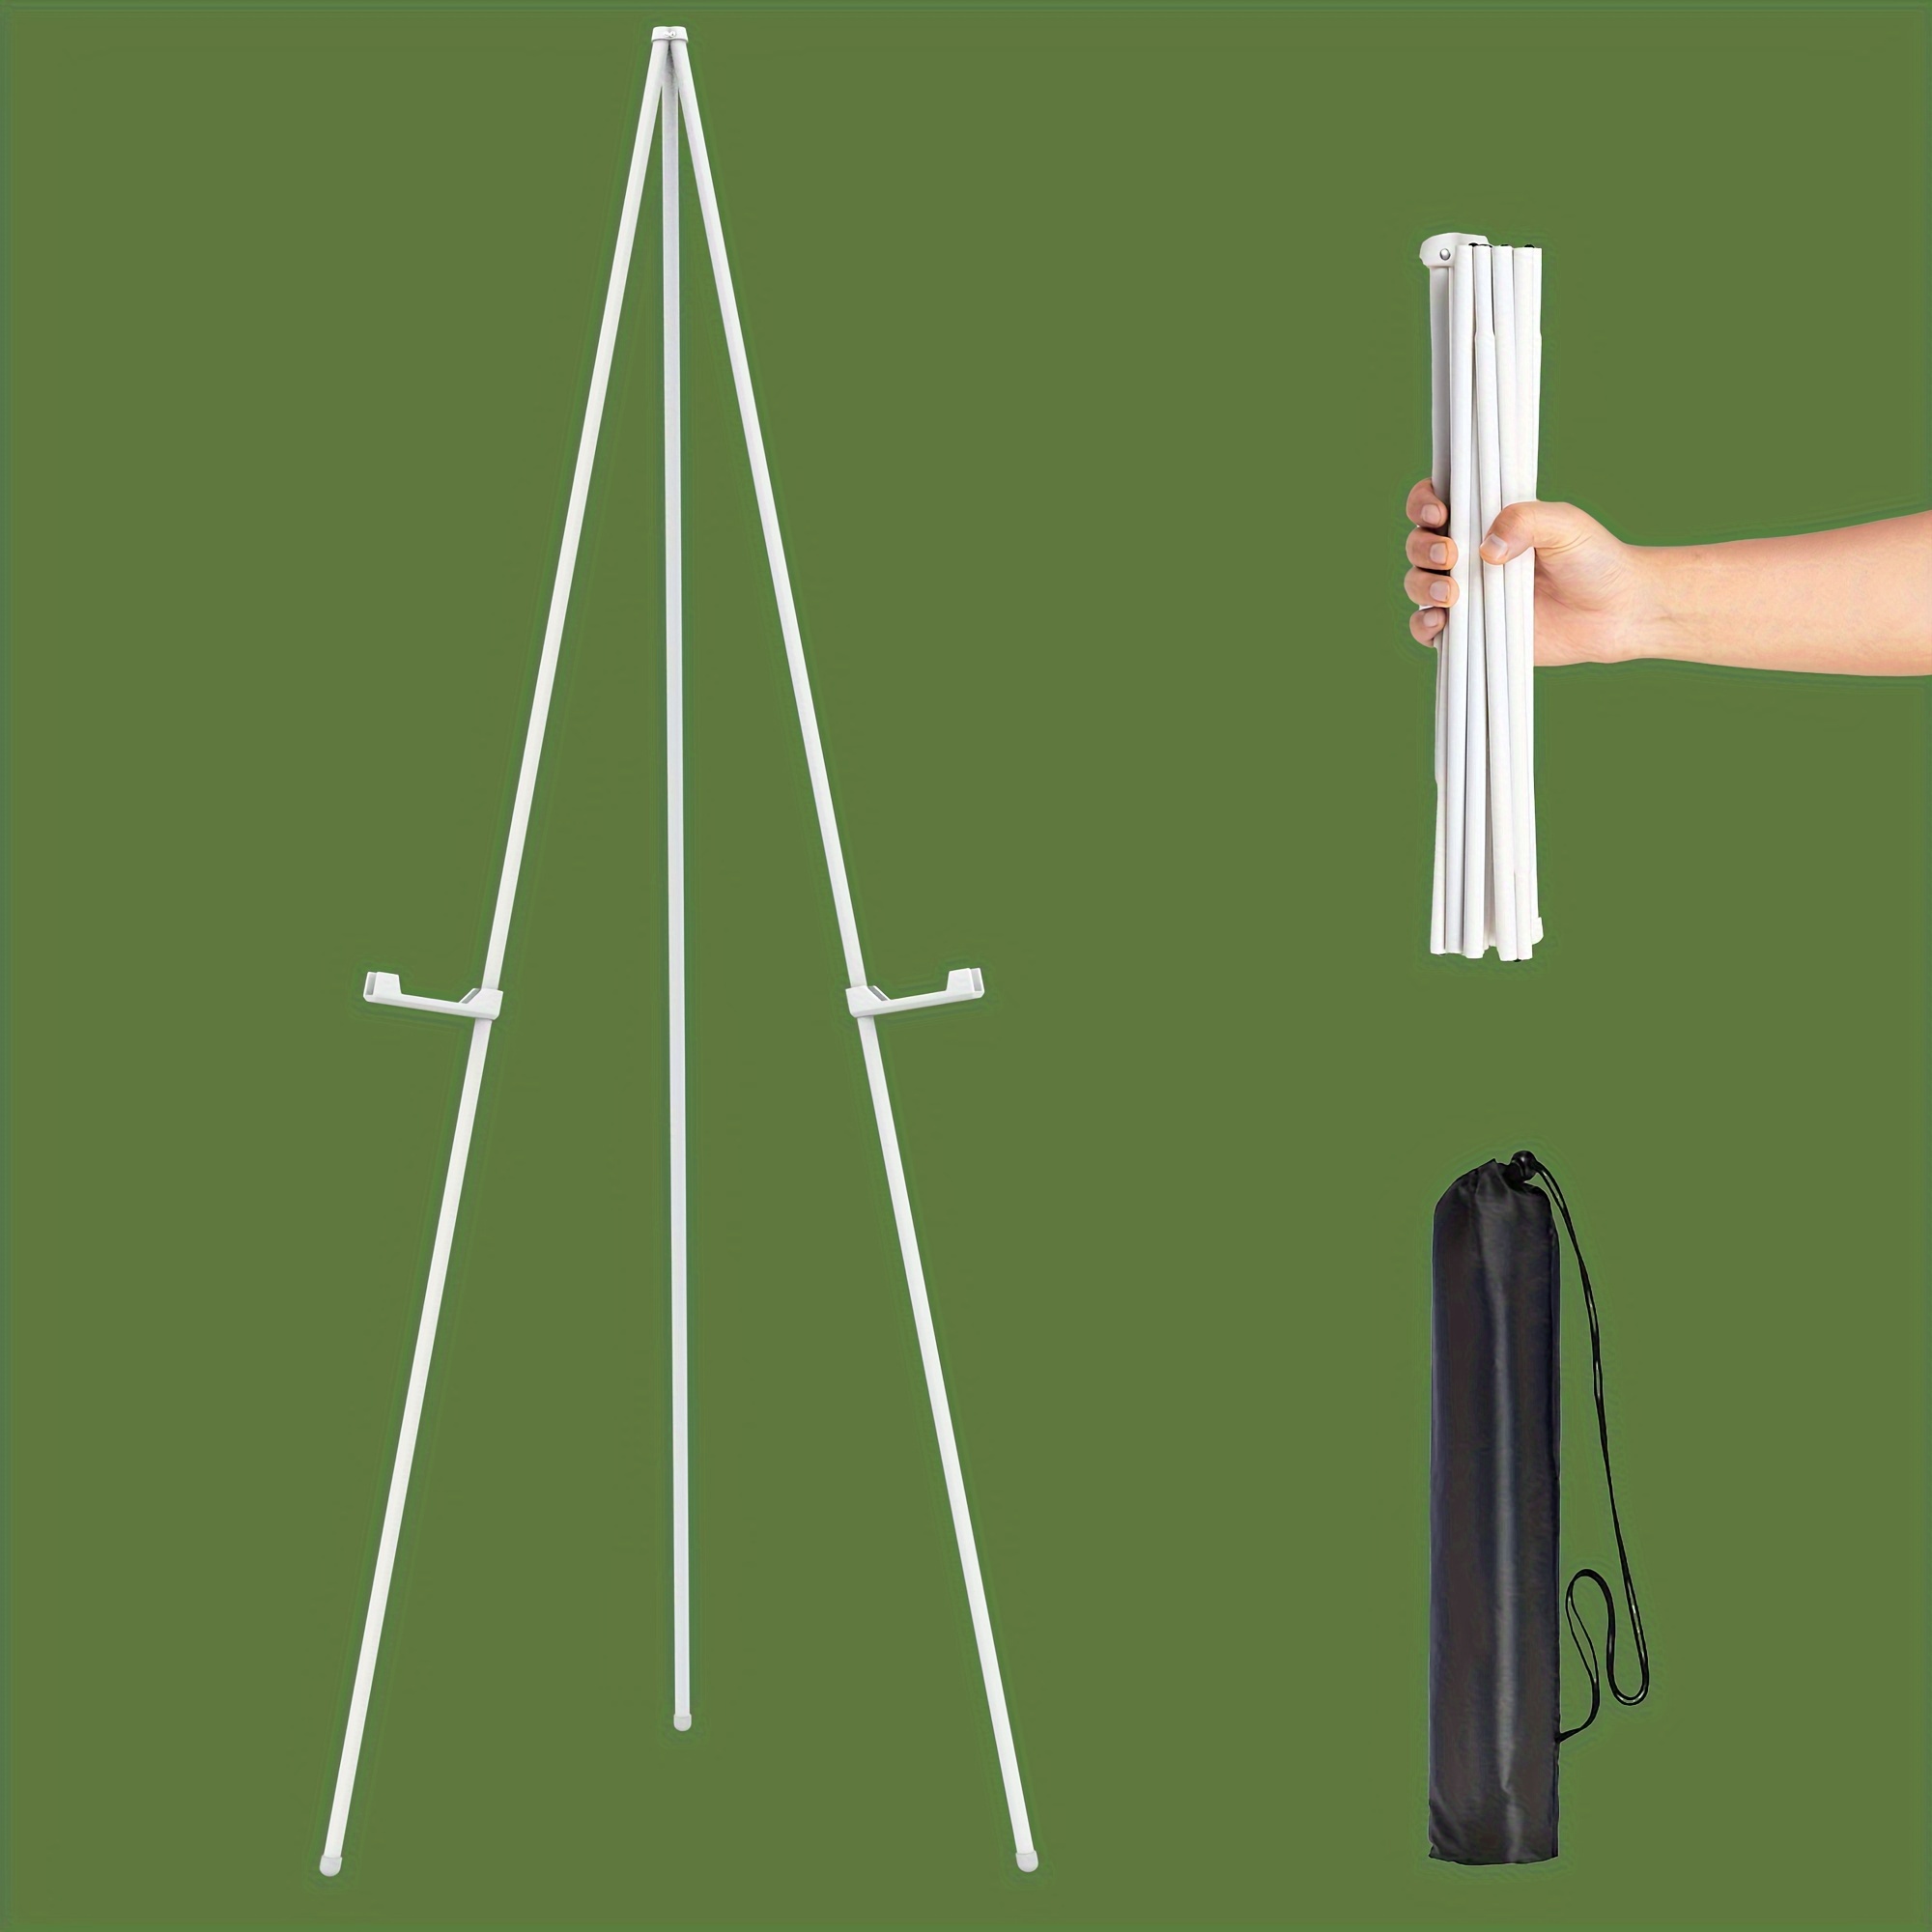 

New White Easel Stand For Display Wedding Sign & Poster - 63 Inches Tall Easels For Display Holder - Collapsable Portable Poster Easel - Floor Adjustable Metal Painting Easel Tripod